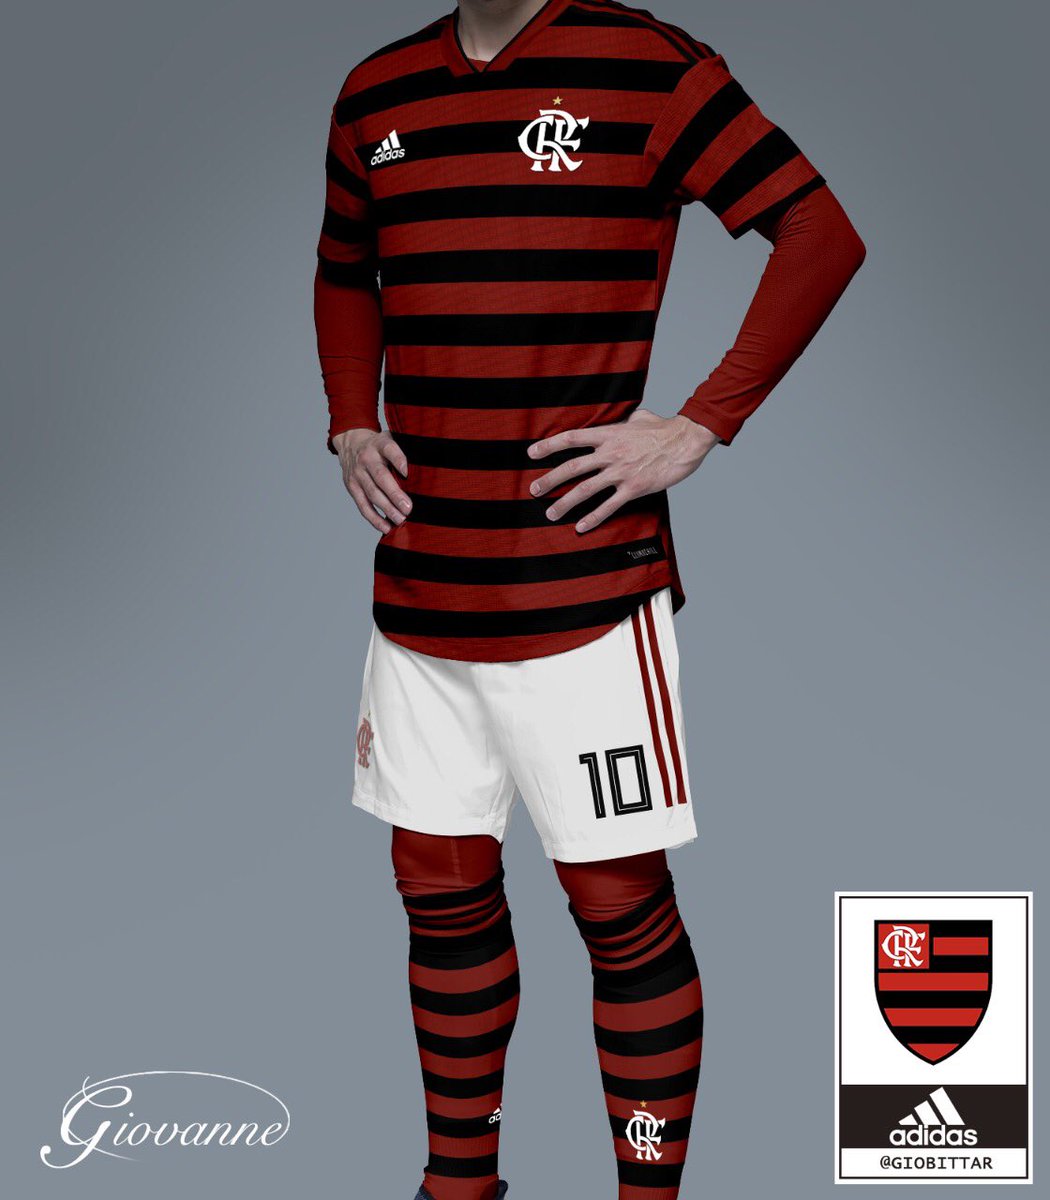 Adidas Flamengo 2019-20 Home Kit To Be Launched Next Week ...